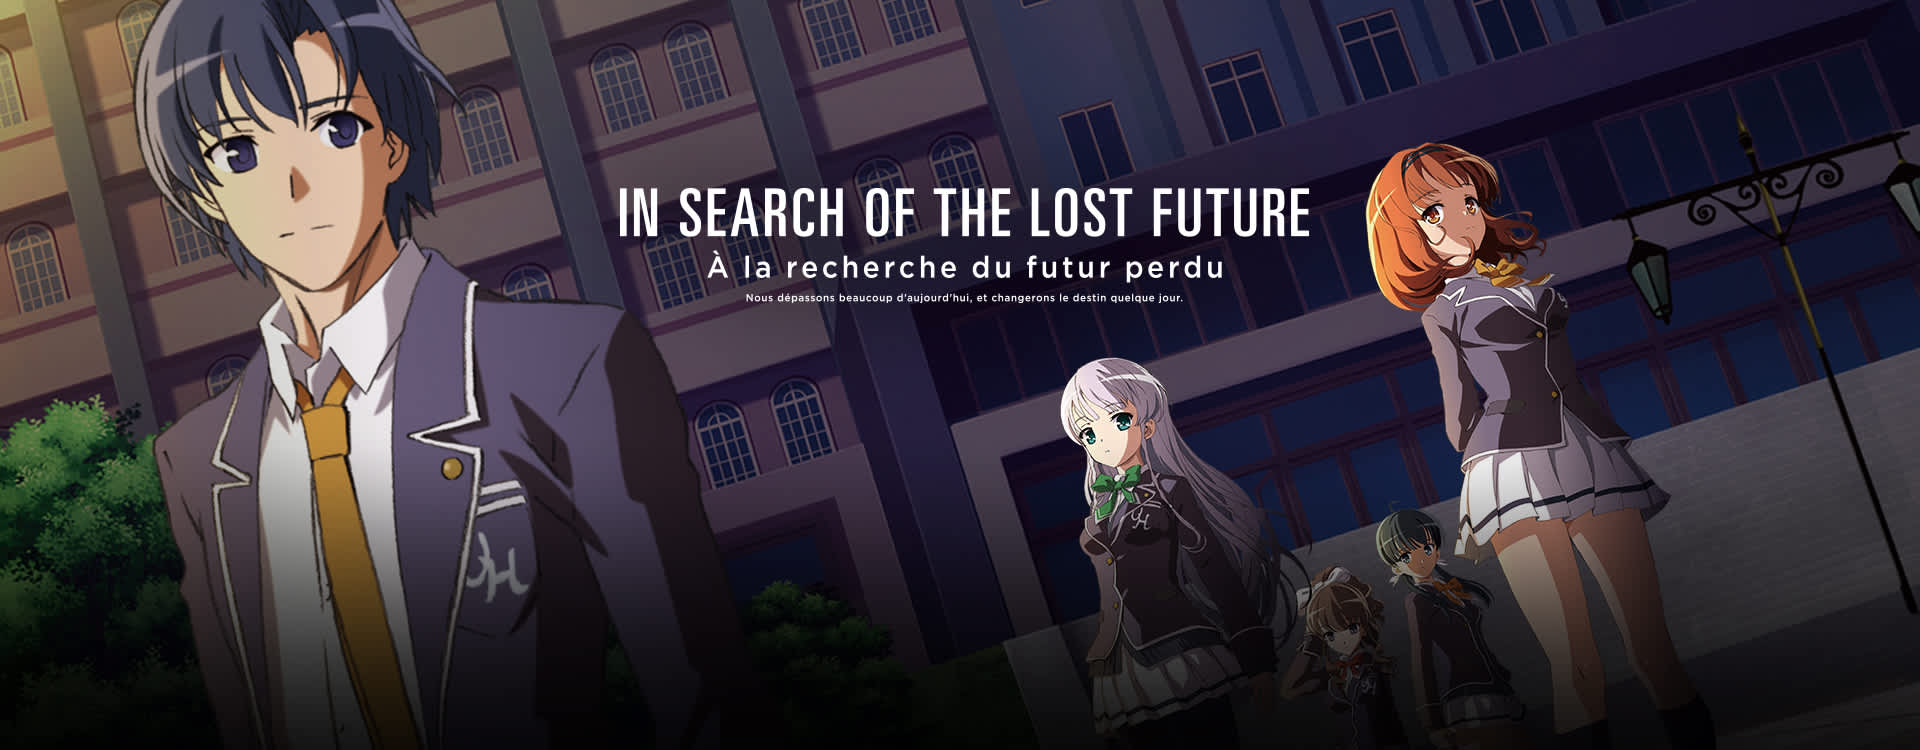 download in search of the lost future manga